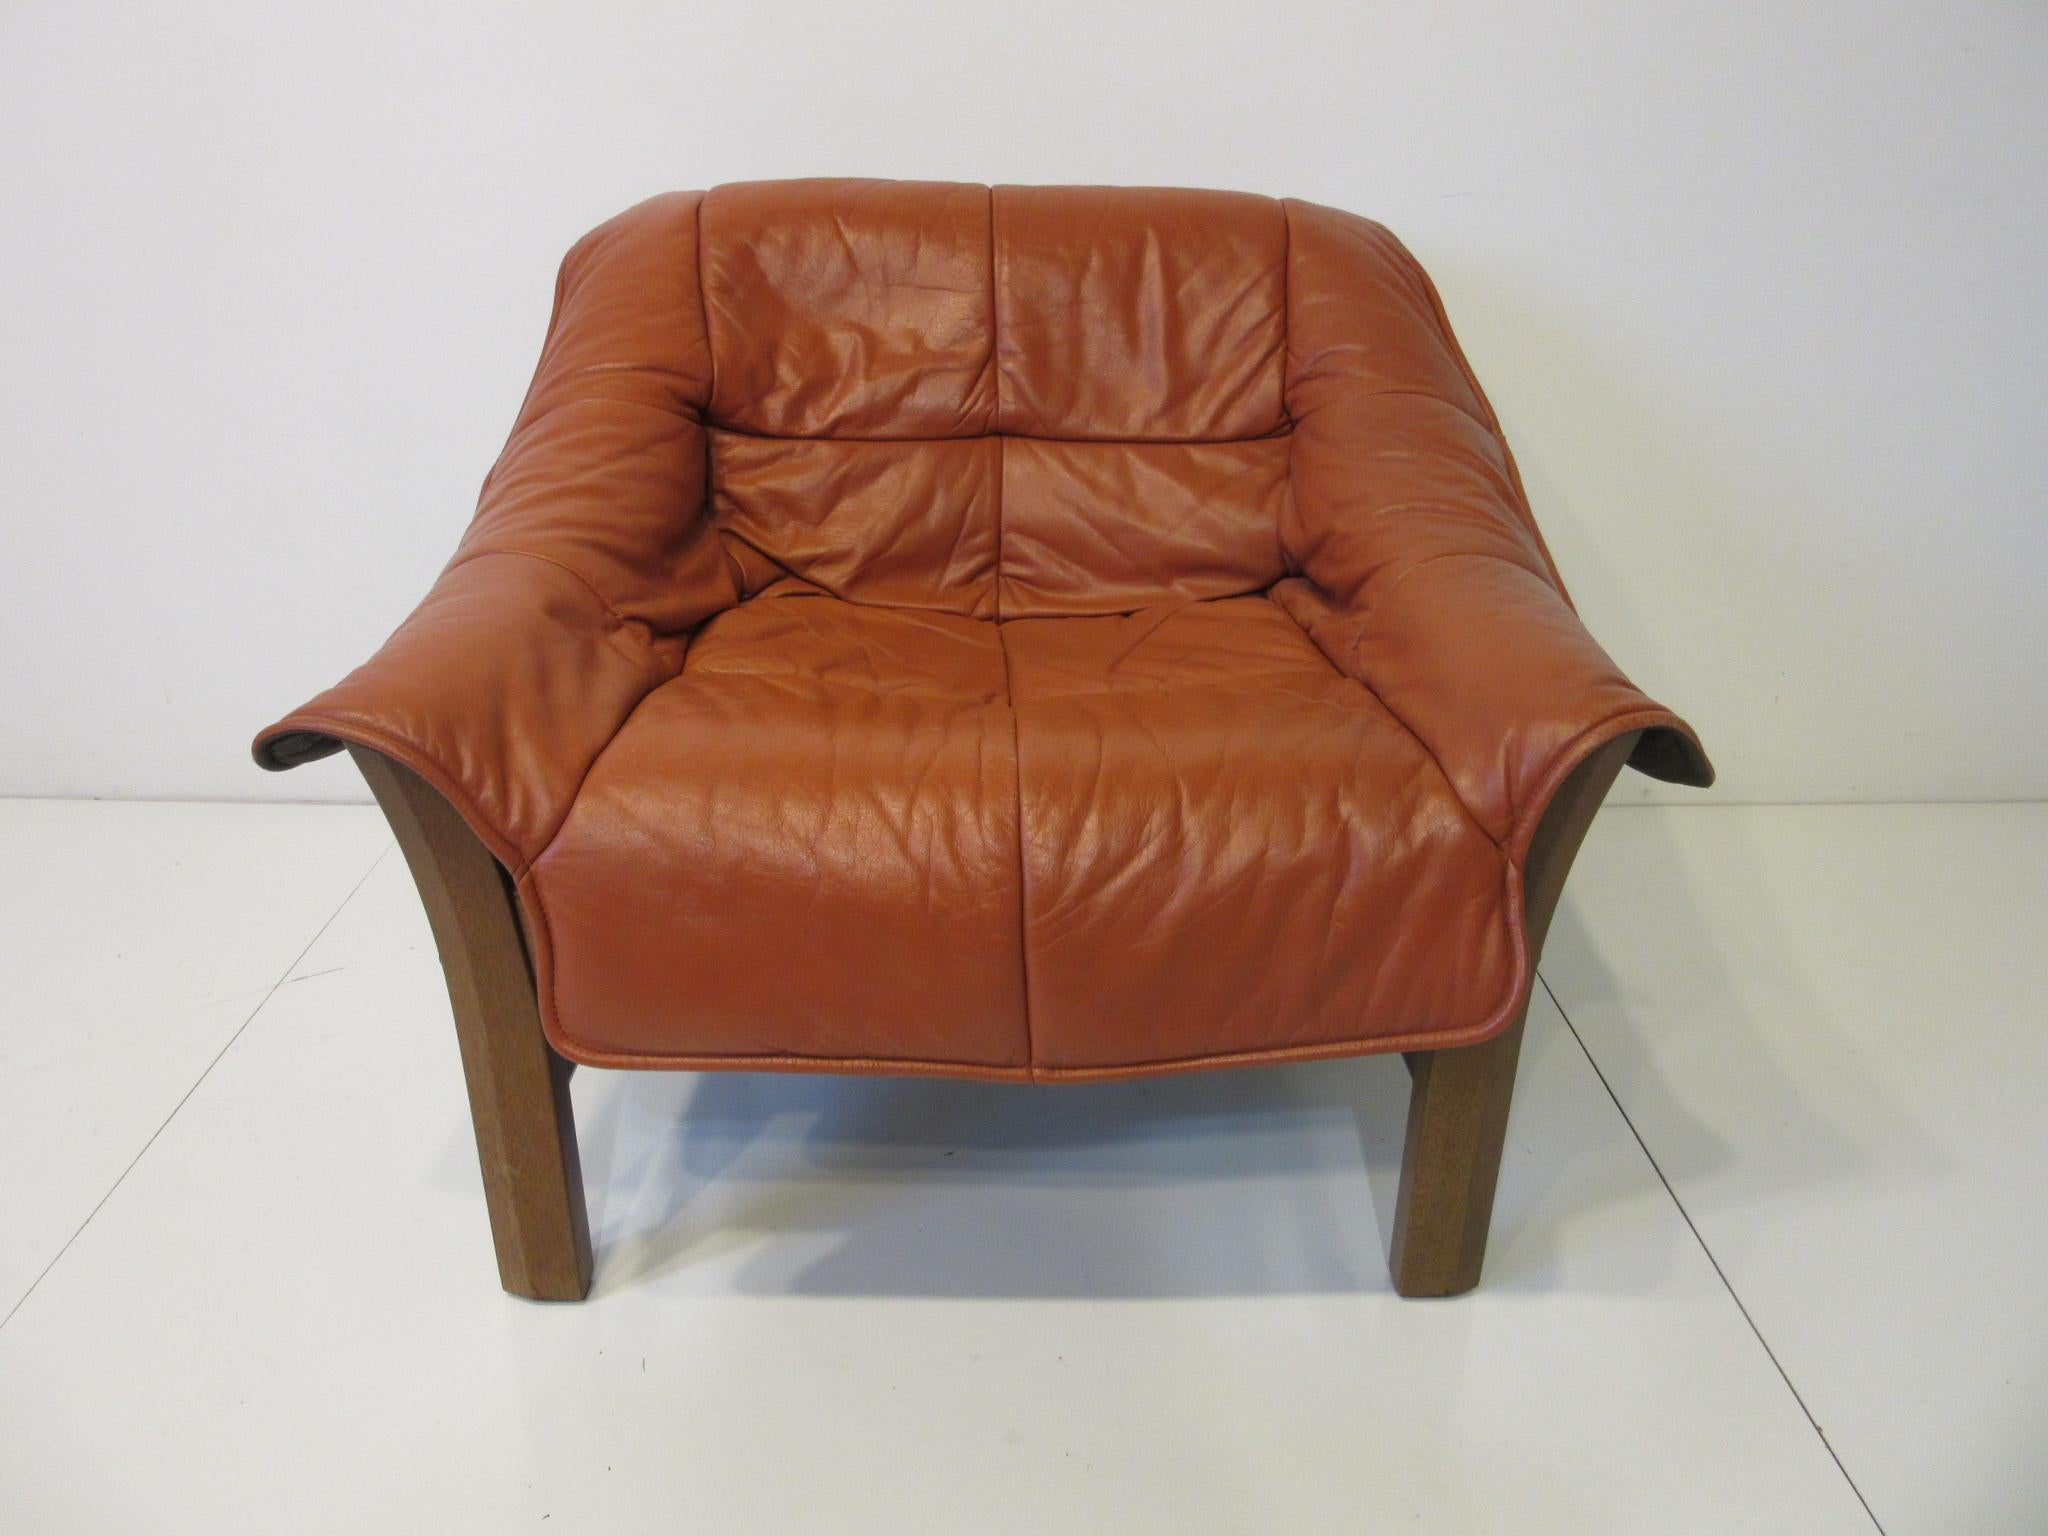 Brazilian Leather and Rosewood Lounge Chair in the style of Lafer, Brazil